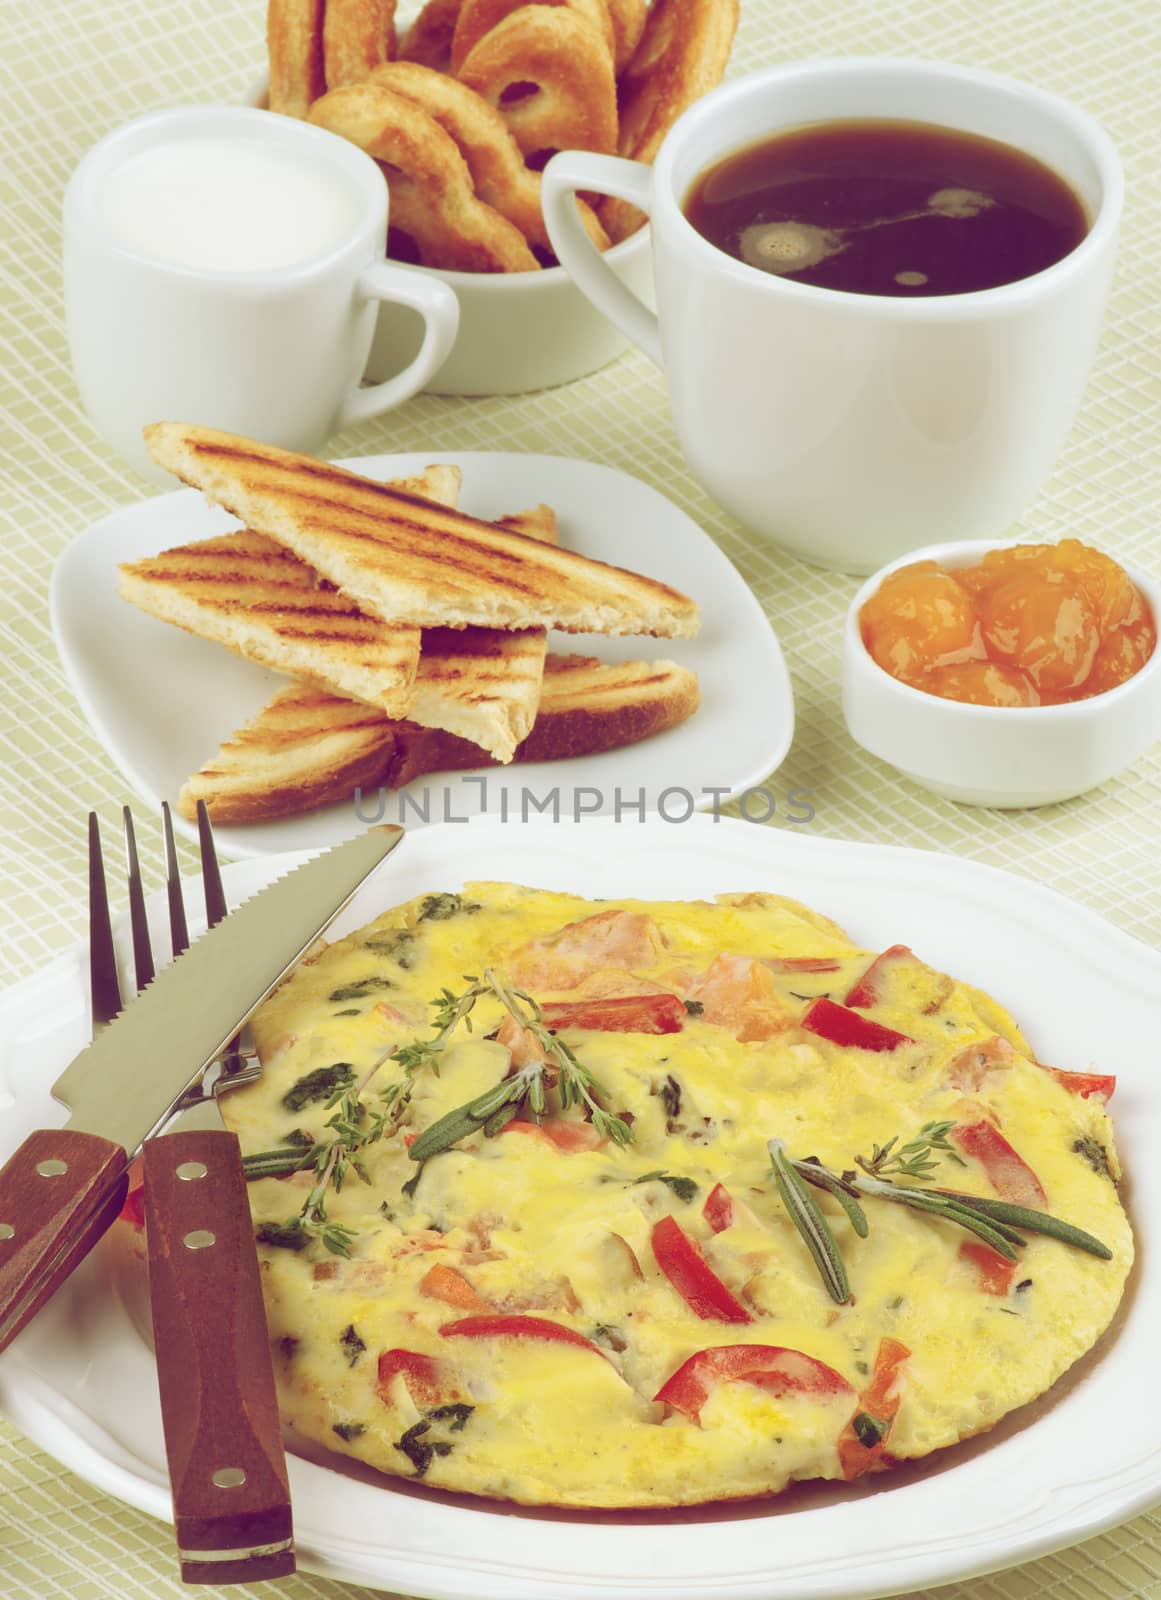 Hearty Classic Breakfast with Delicious Omelet, Toasts, Apricot Jam, Cup of Coffee, Milk and Puff Pastry closeup on Light Green Checkered background. Retro Styled